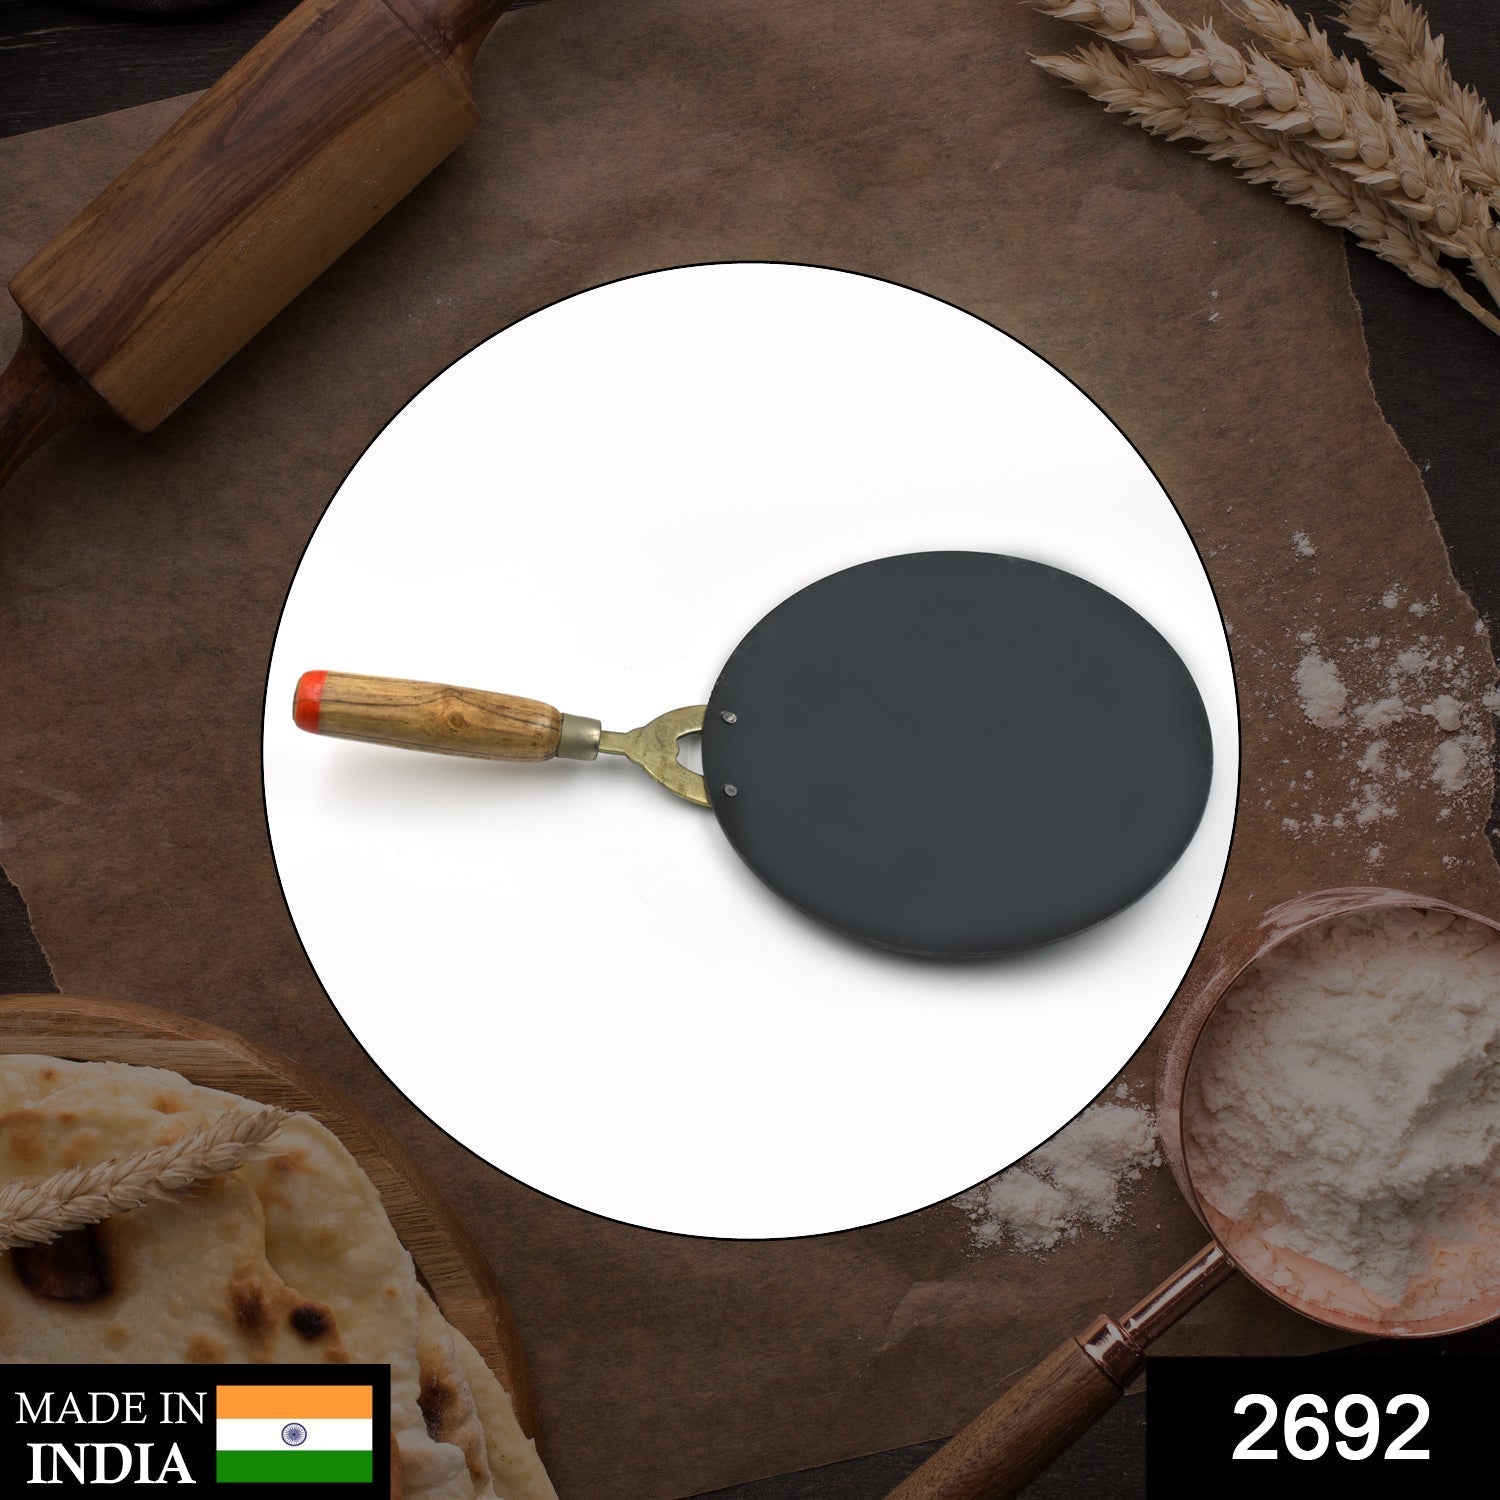 2692 Wooden Handle Roti Tawa used in all household and kitchen purposes for making rotis and parathas etc. freeshipping - DeoDap